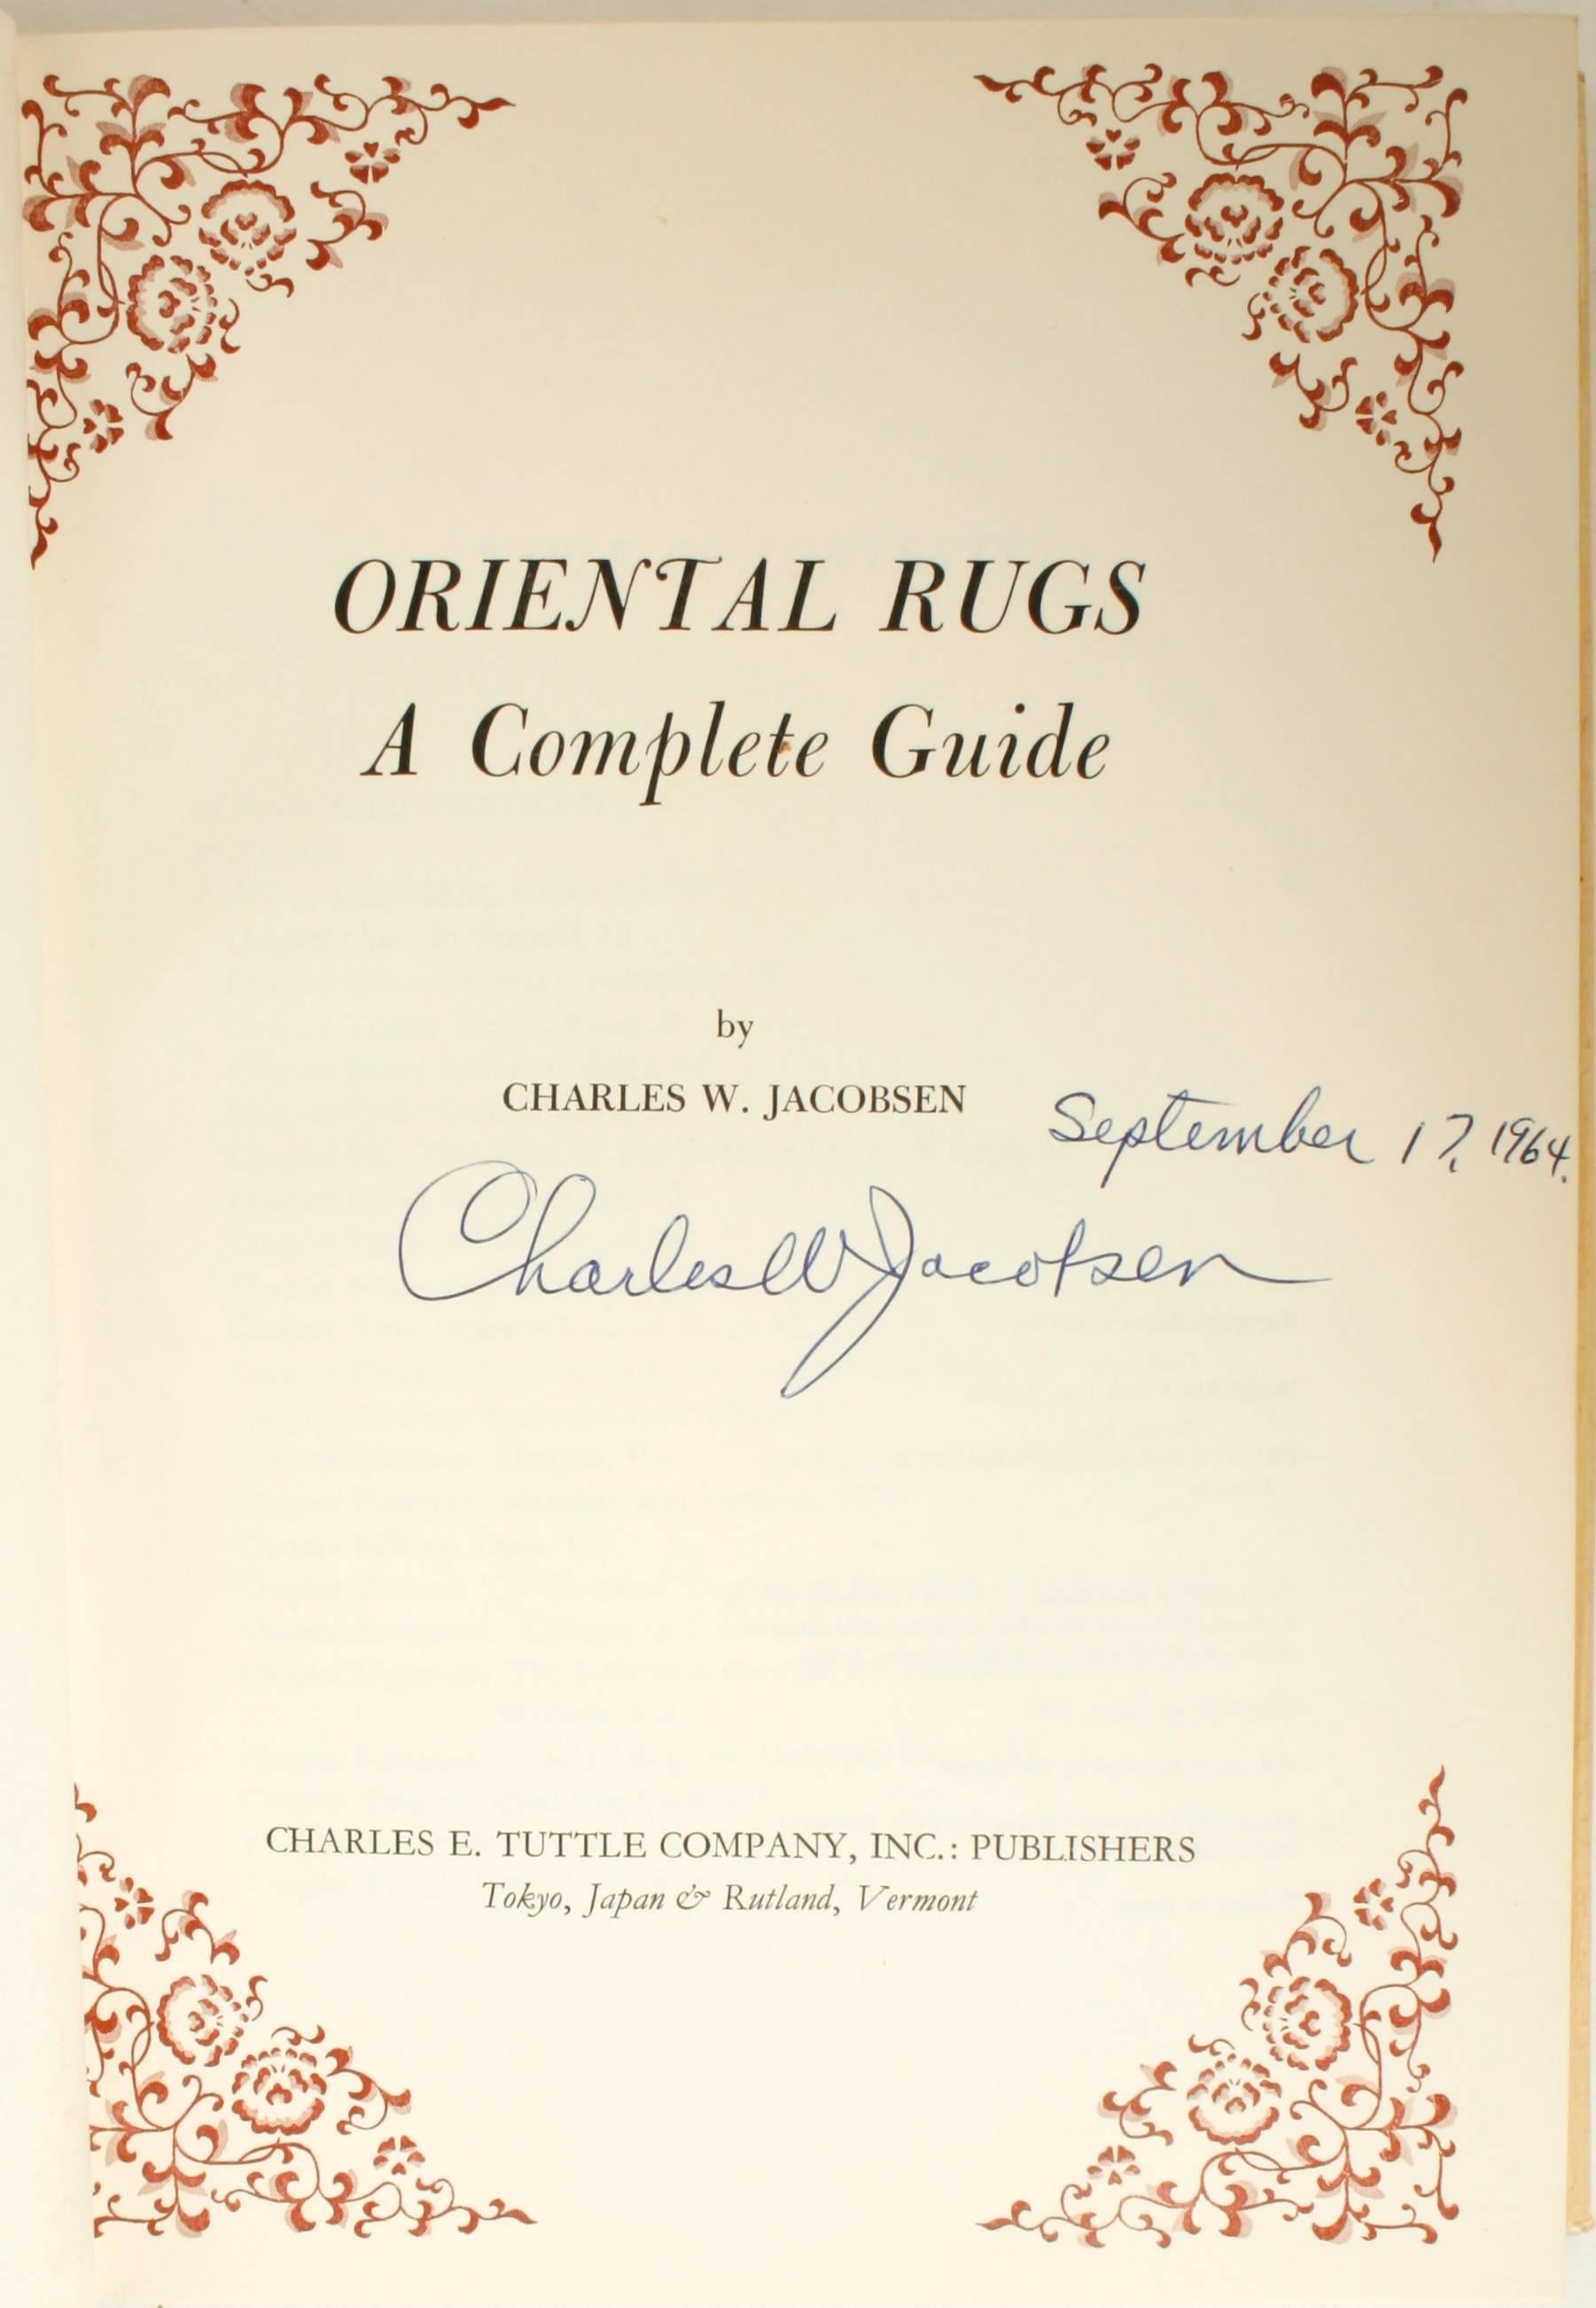 Oriental rugs, A Complete Guide by Charles W. Jacobsen. Rutland: Charles E. Tuttle Company, Inc., 1962. Signed first edition hardcover with dust jacket. 479 pp. A detailed resource book written for the first time rug buyer, the collector, museum and